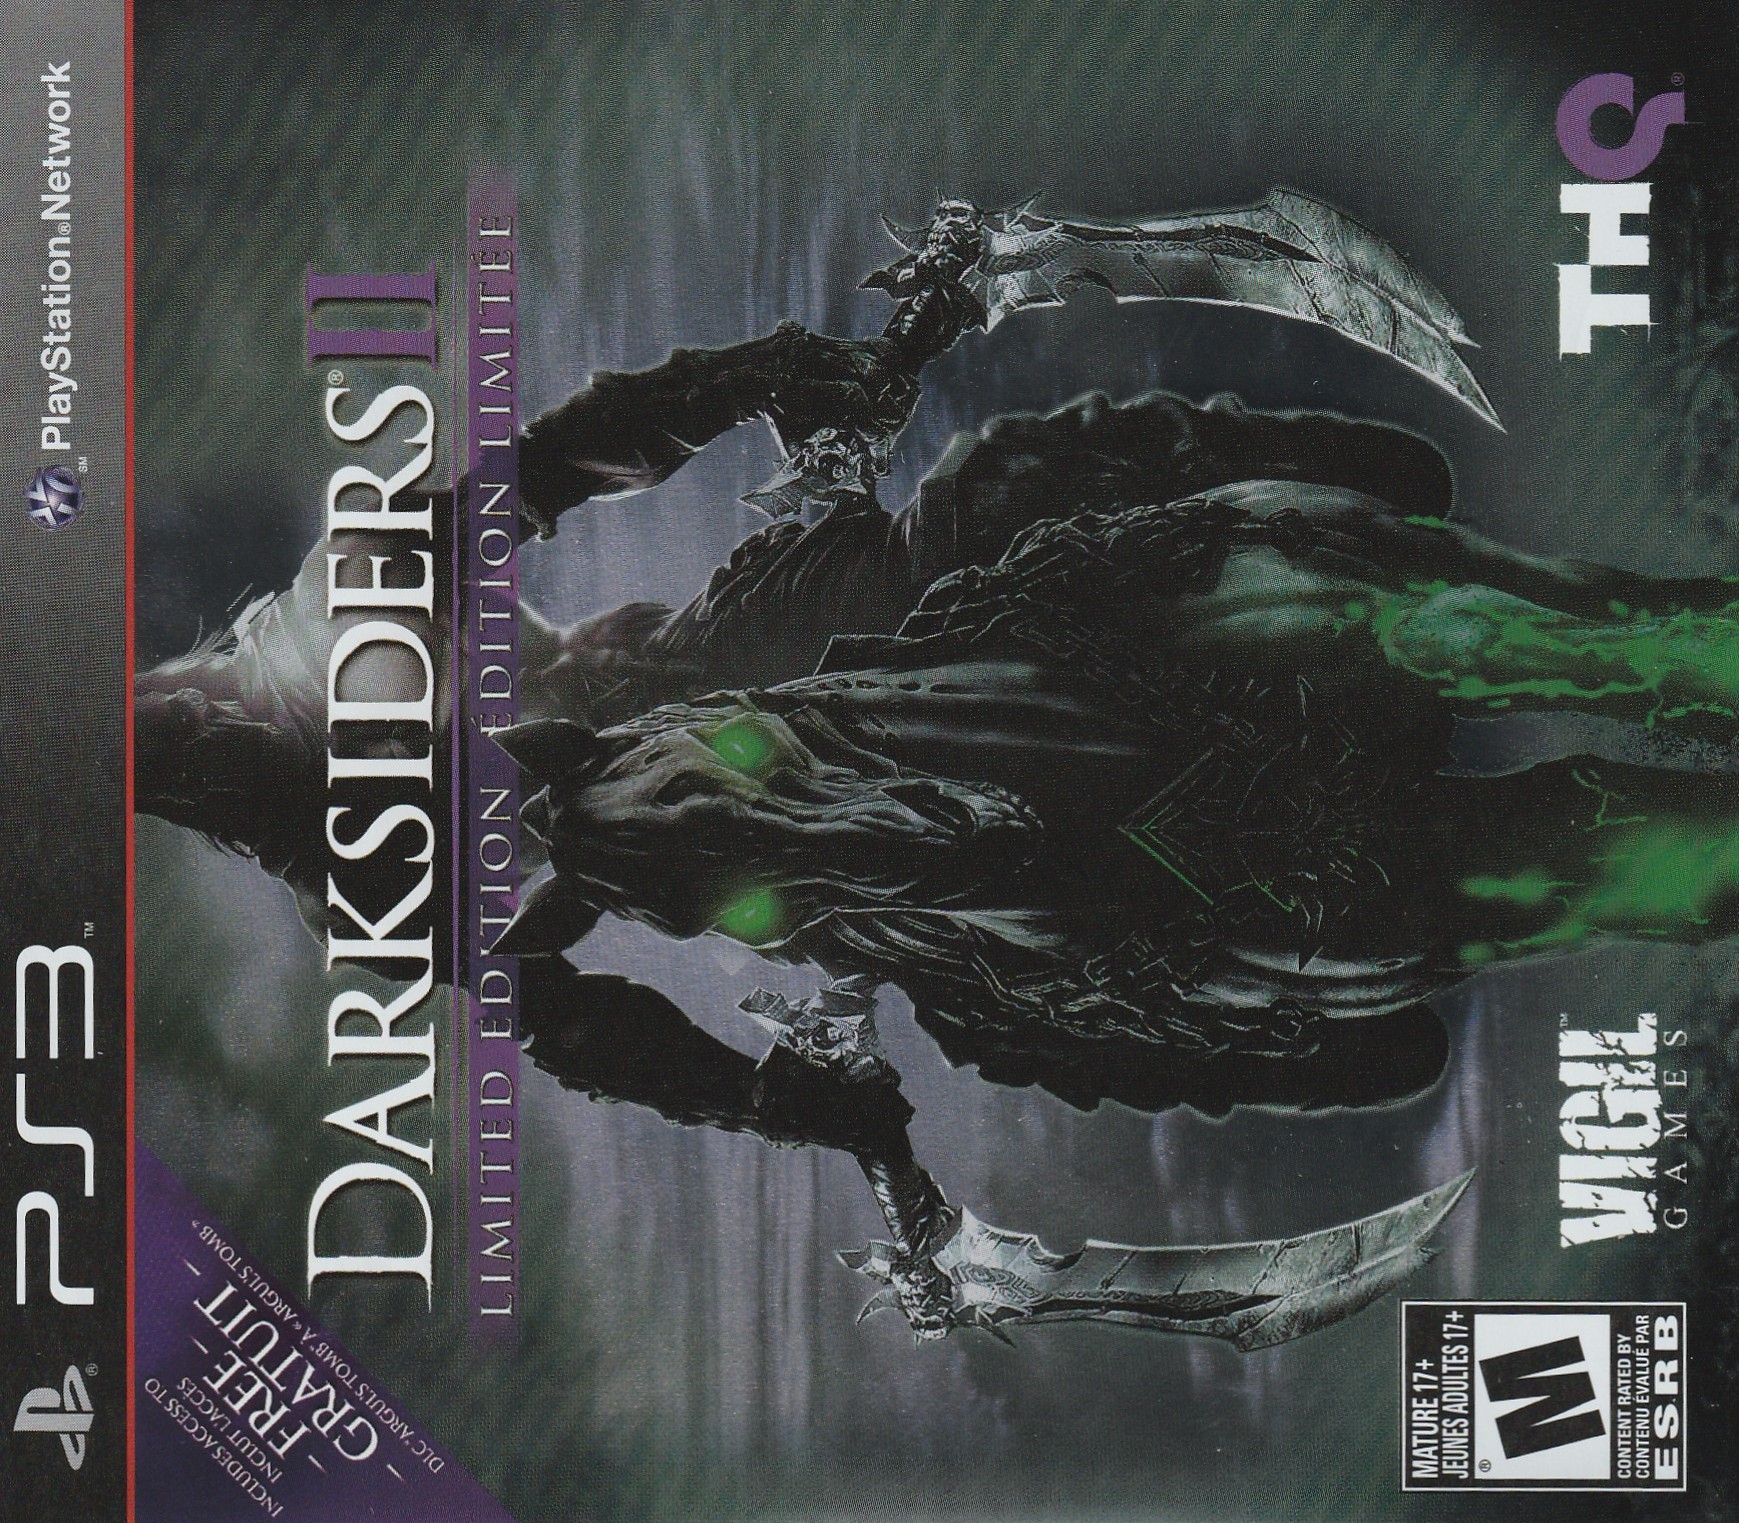 'Darksiders 2 - limited edition'